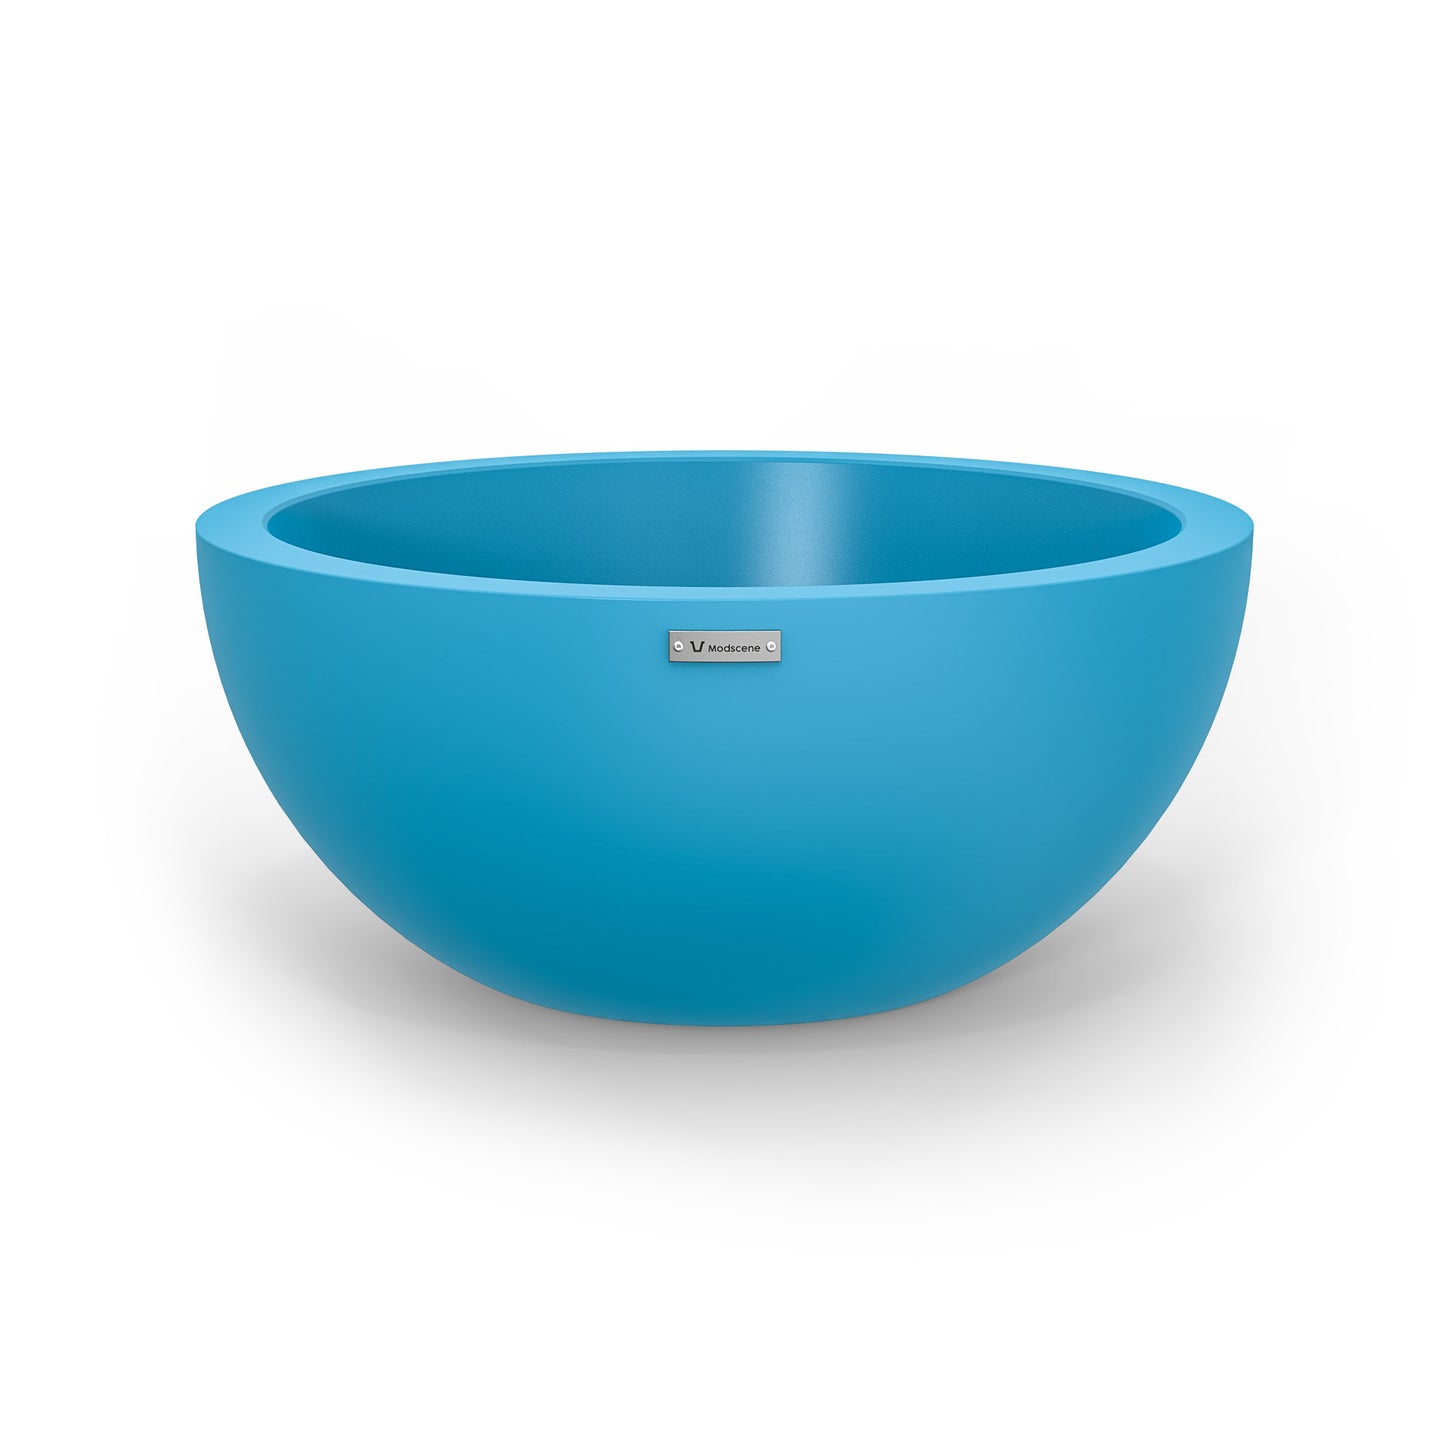 A large planter bowl made by Modscene in a light blue colour.